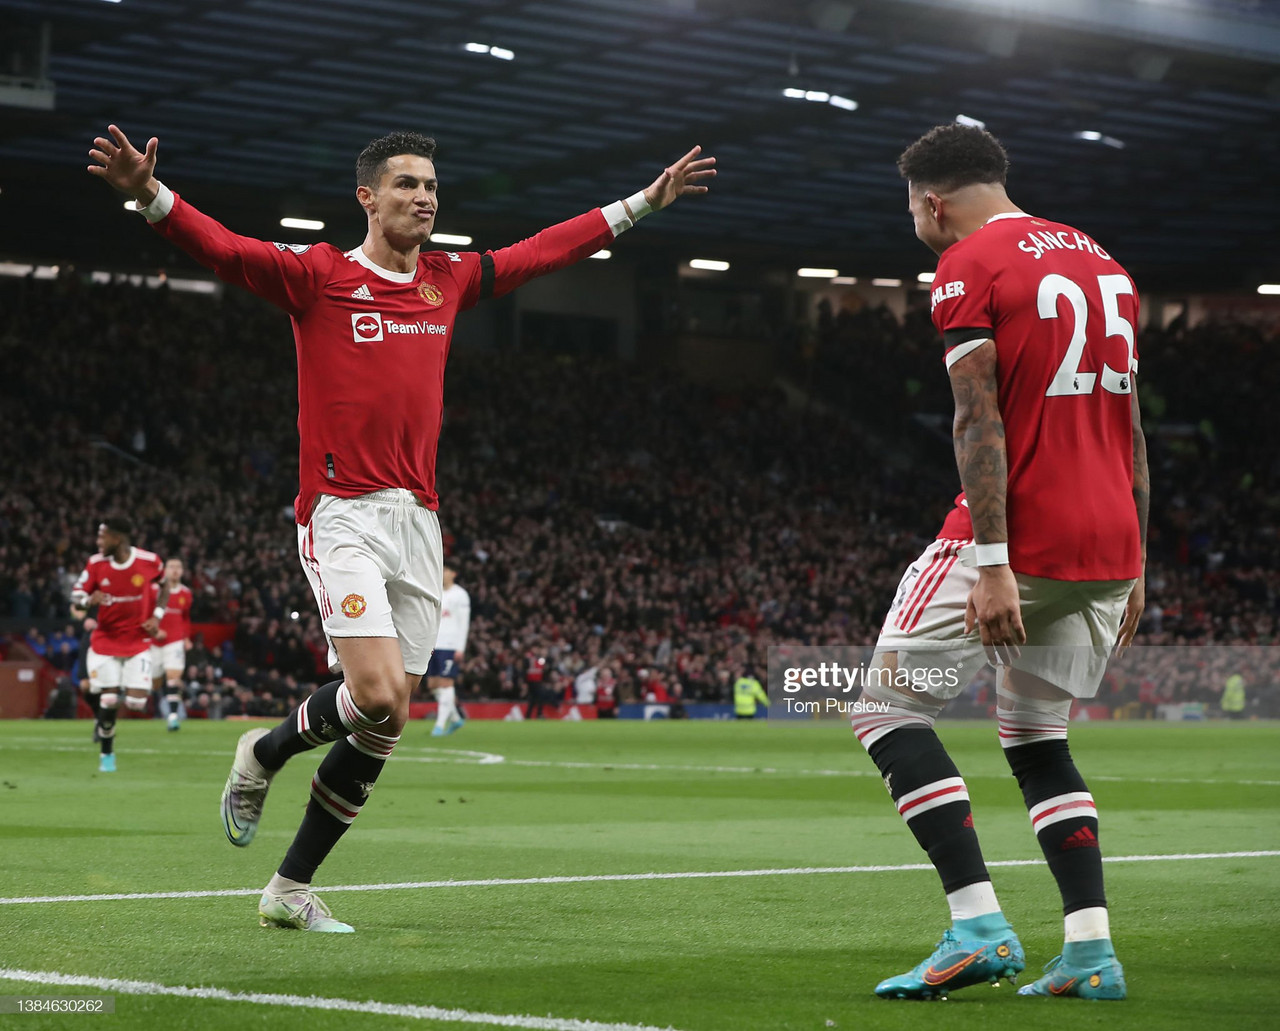 Manchester United 3-2 Tottenham Hotspur: That boy Ronaldo makes history and scores the winner in a thriller at Old Trafford